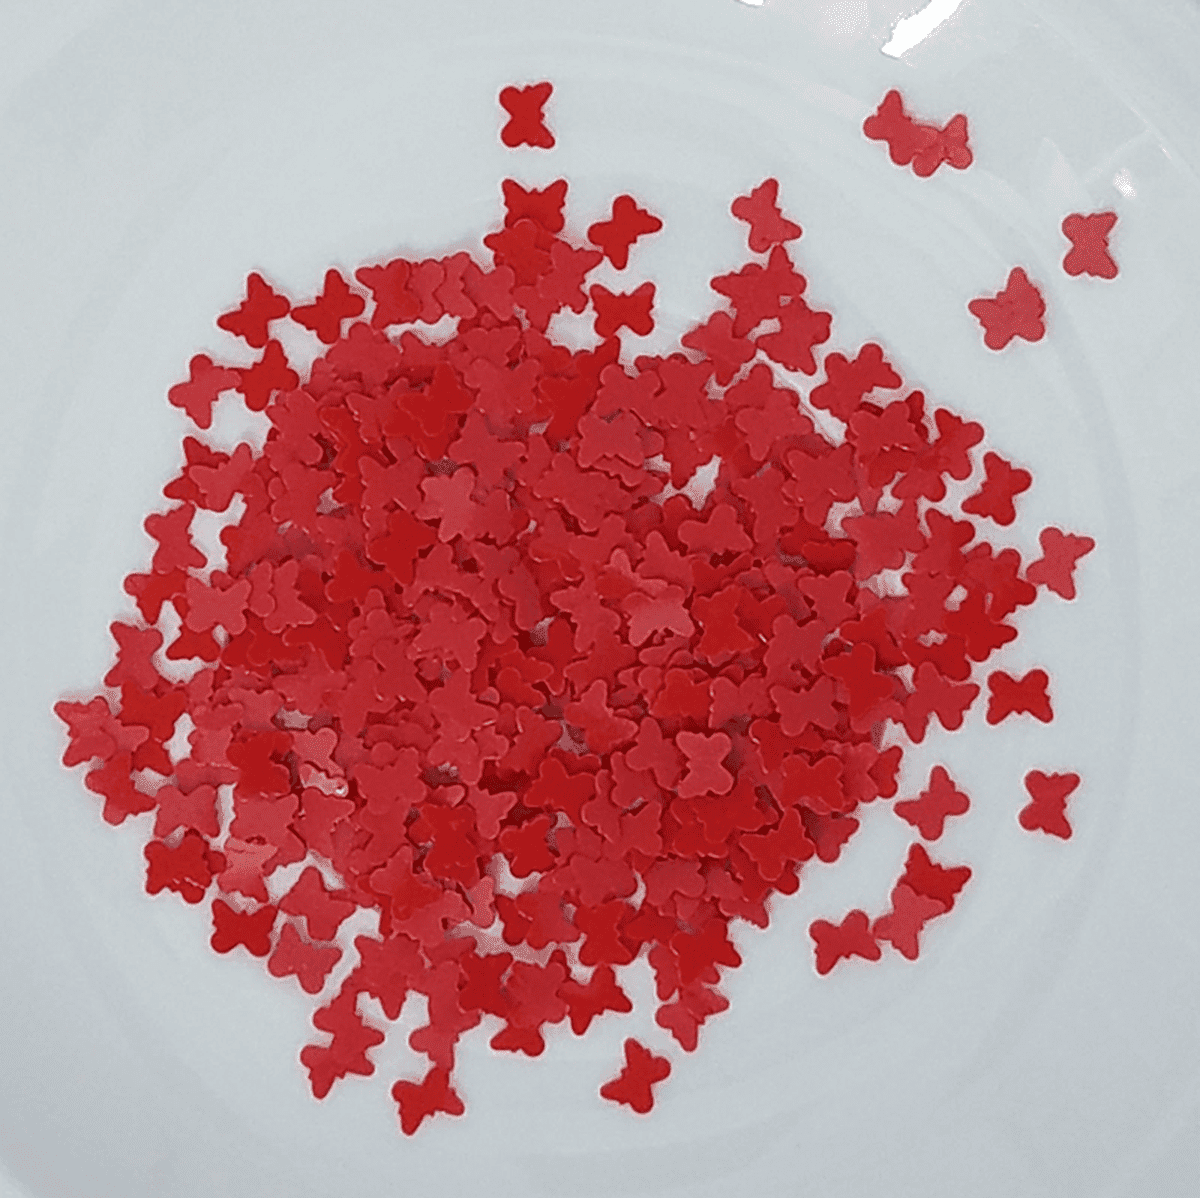 Red Flower Sprinkles - Kat Scrappiness